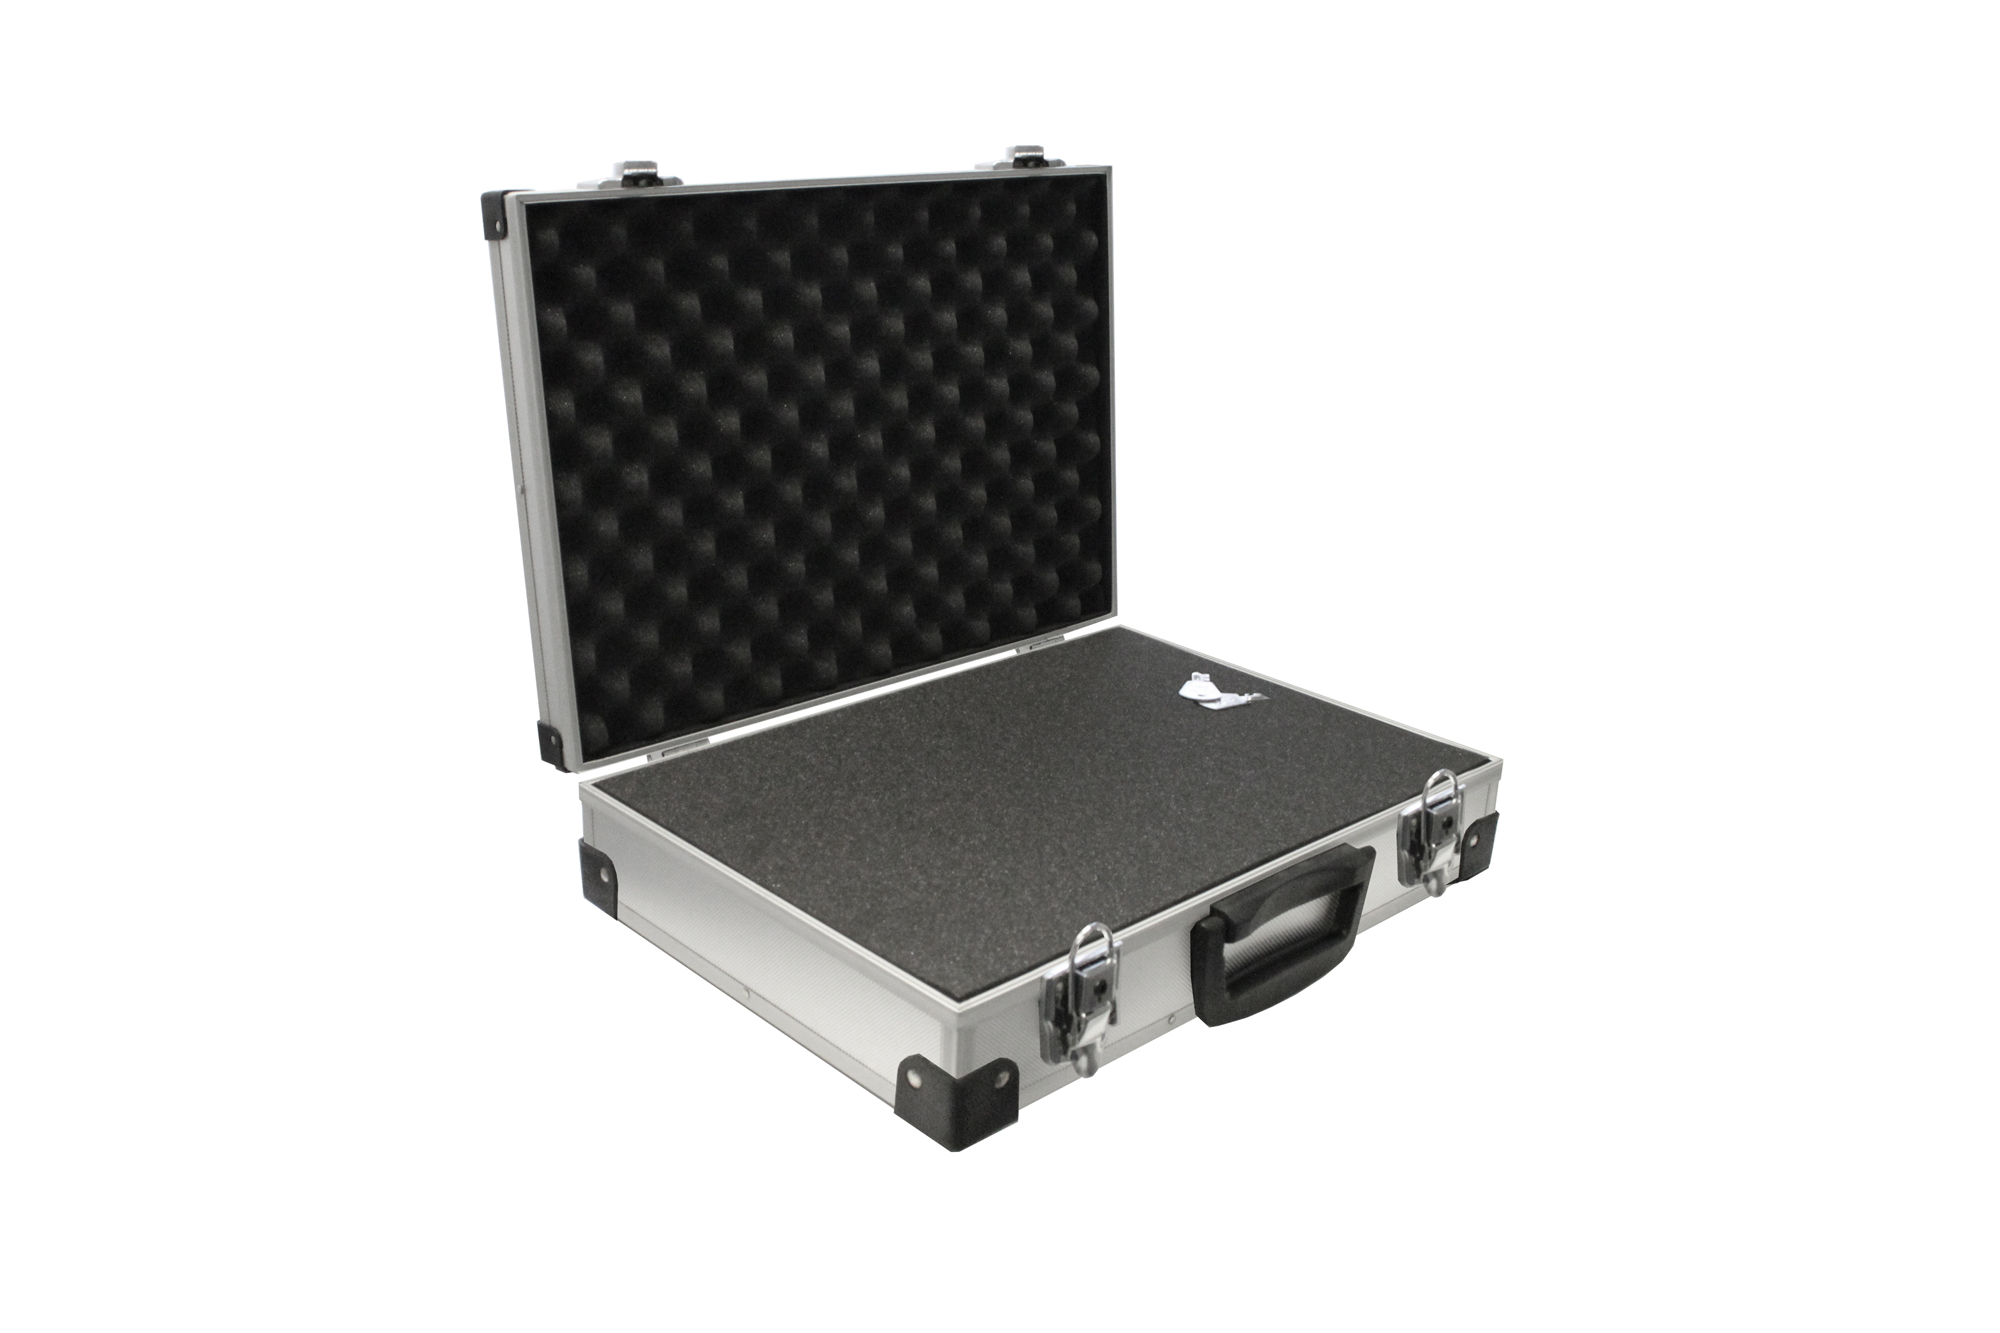 «PeakTech® P 7260» Carrying Case for Measurement Instruments